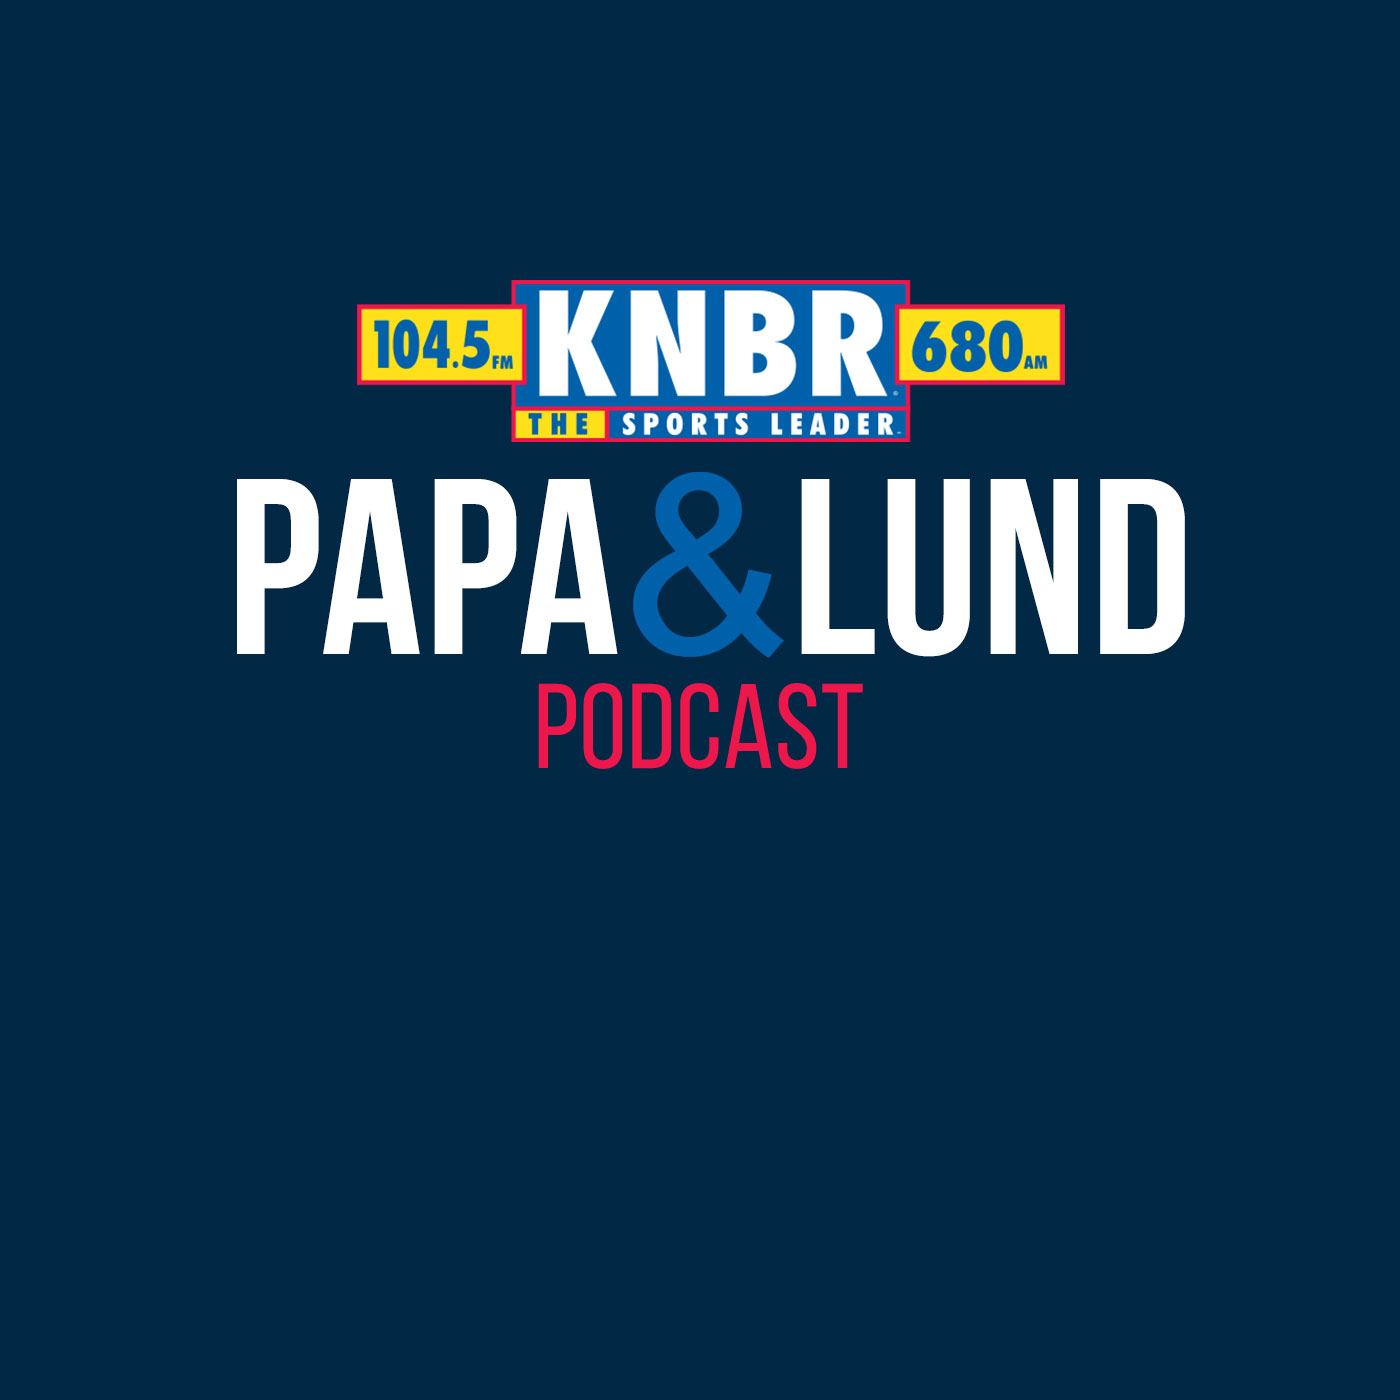 1-30 Mike Pereira joins Papa & Lund to discuss some questionable calls from Championship Sunday and says what the NFL could do better to get the calls right